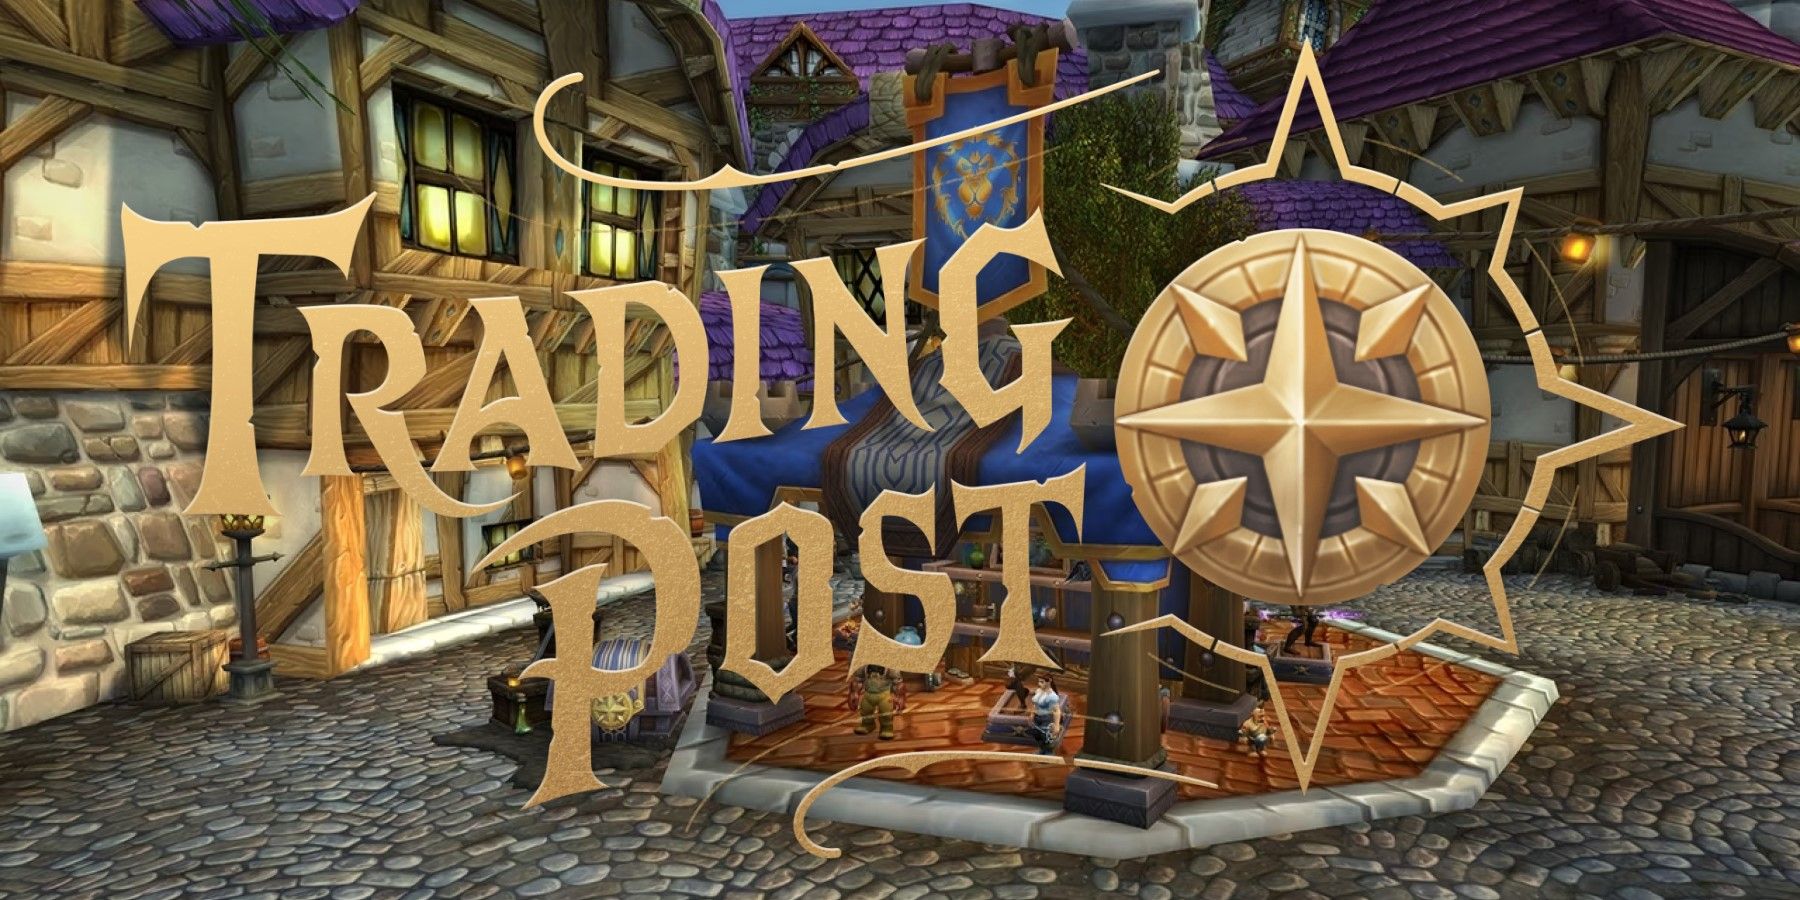 the trading post logo from wow over the alliance trading post